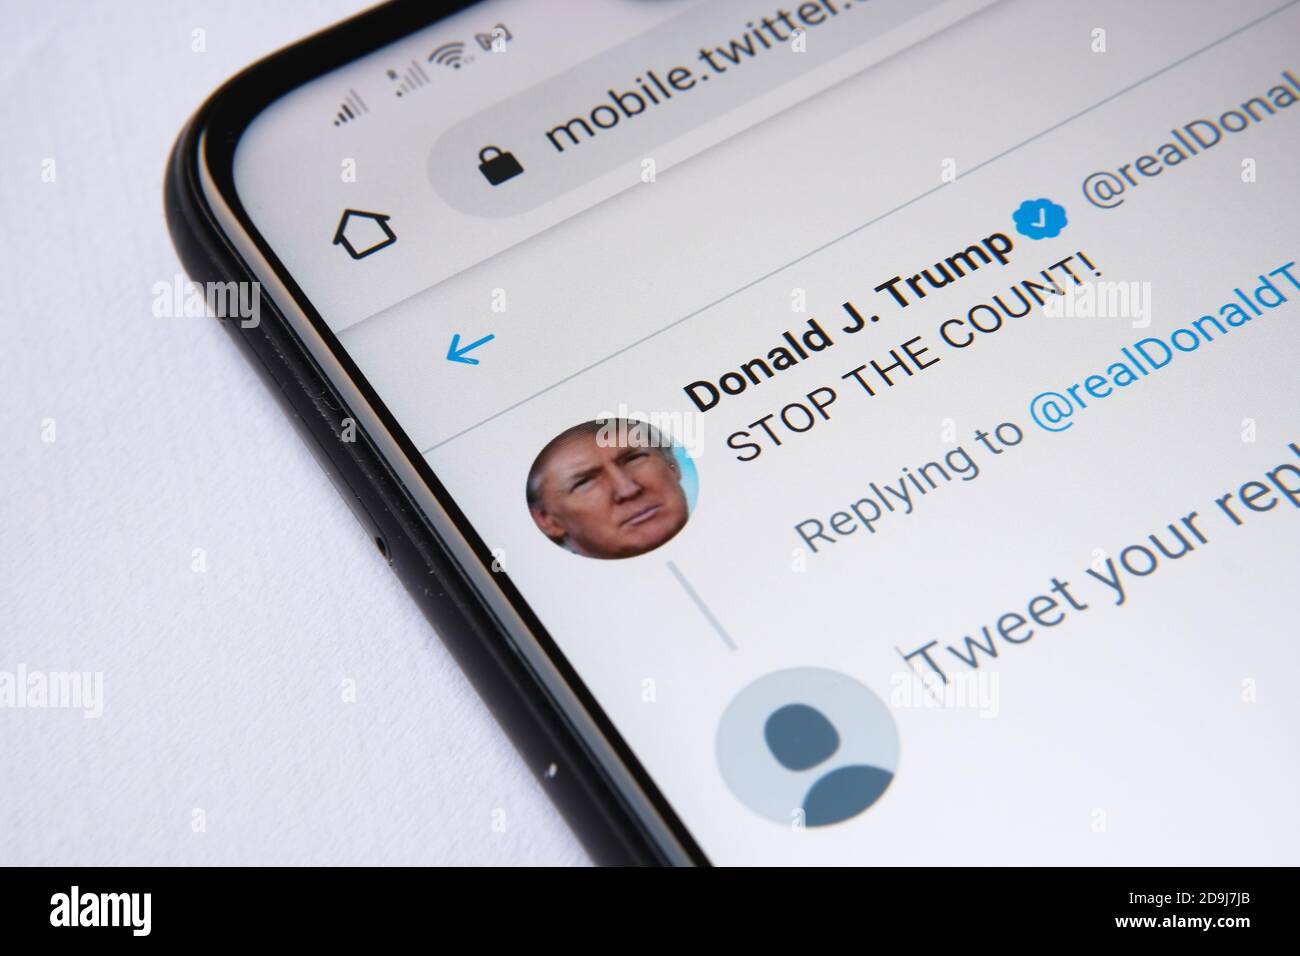 Donald Trump's twitter page with the post 'STOP THE COUNT' seen on the smartphone screen. Stock Photo